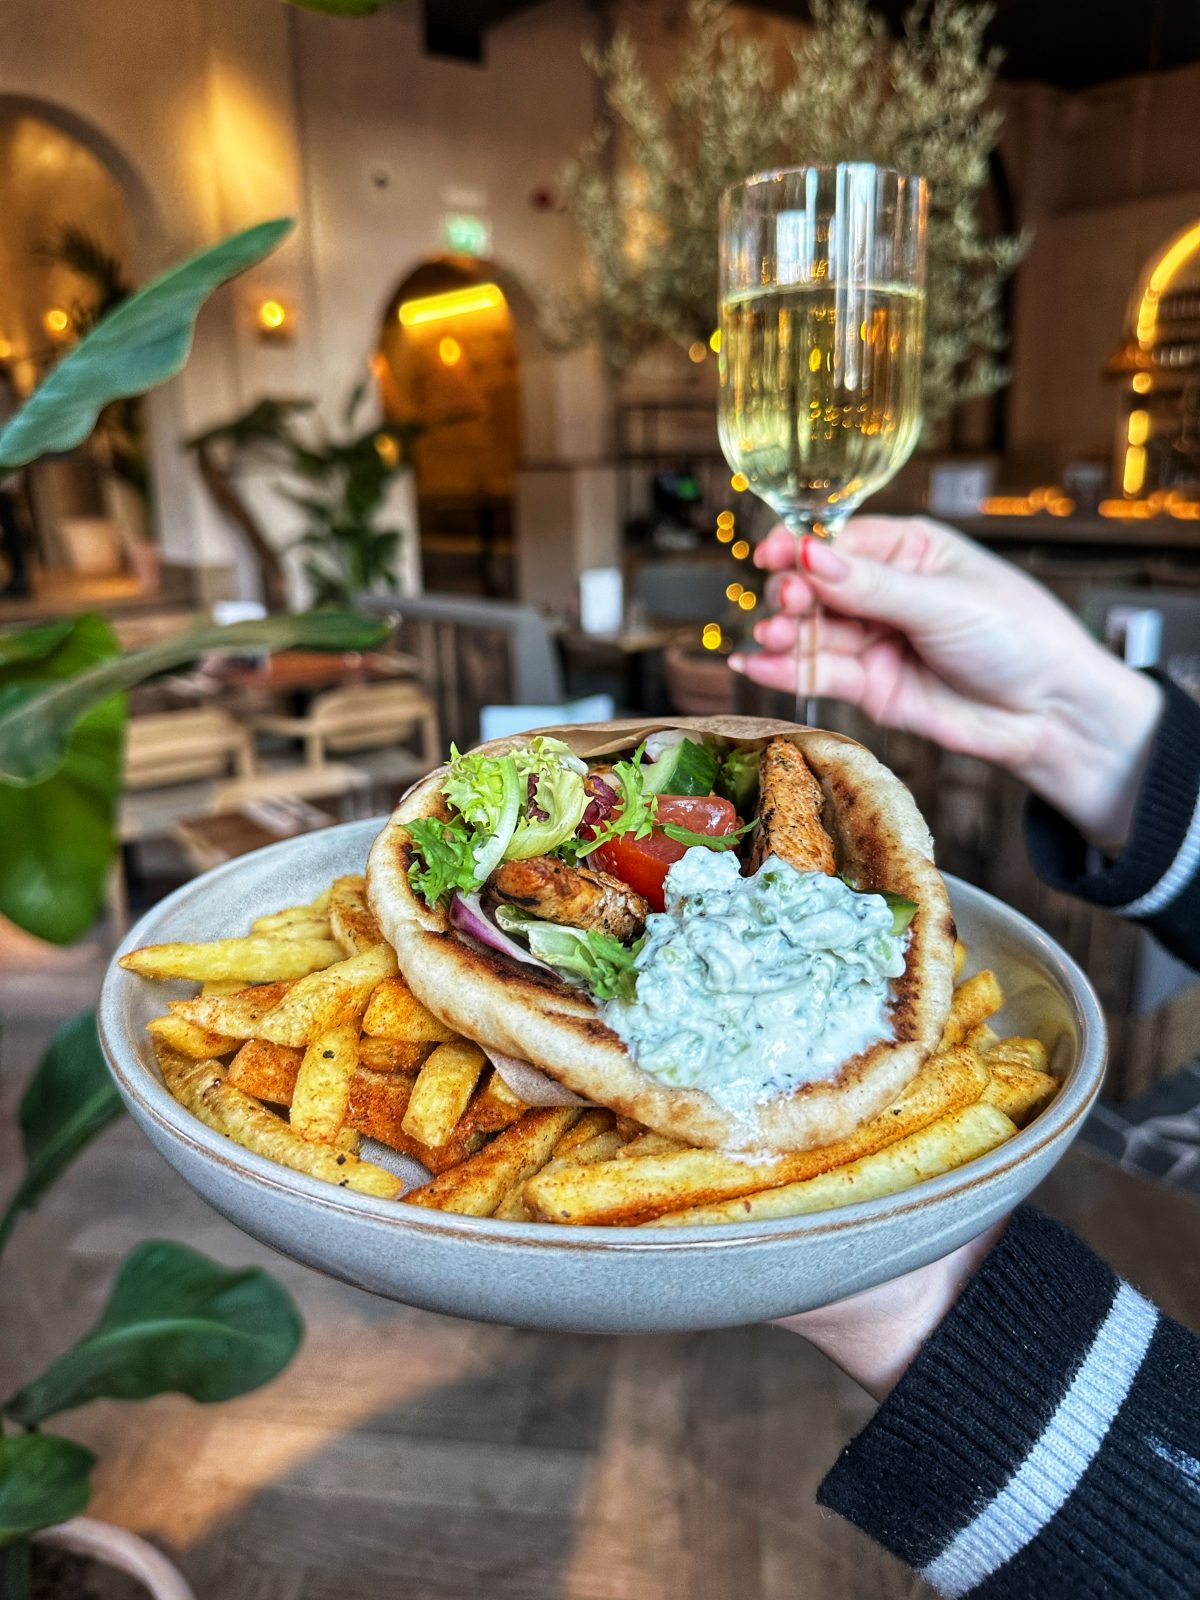 gyros wrap and chips with a glass of wine in the background.